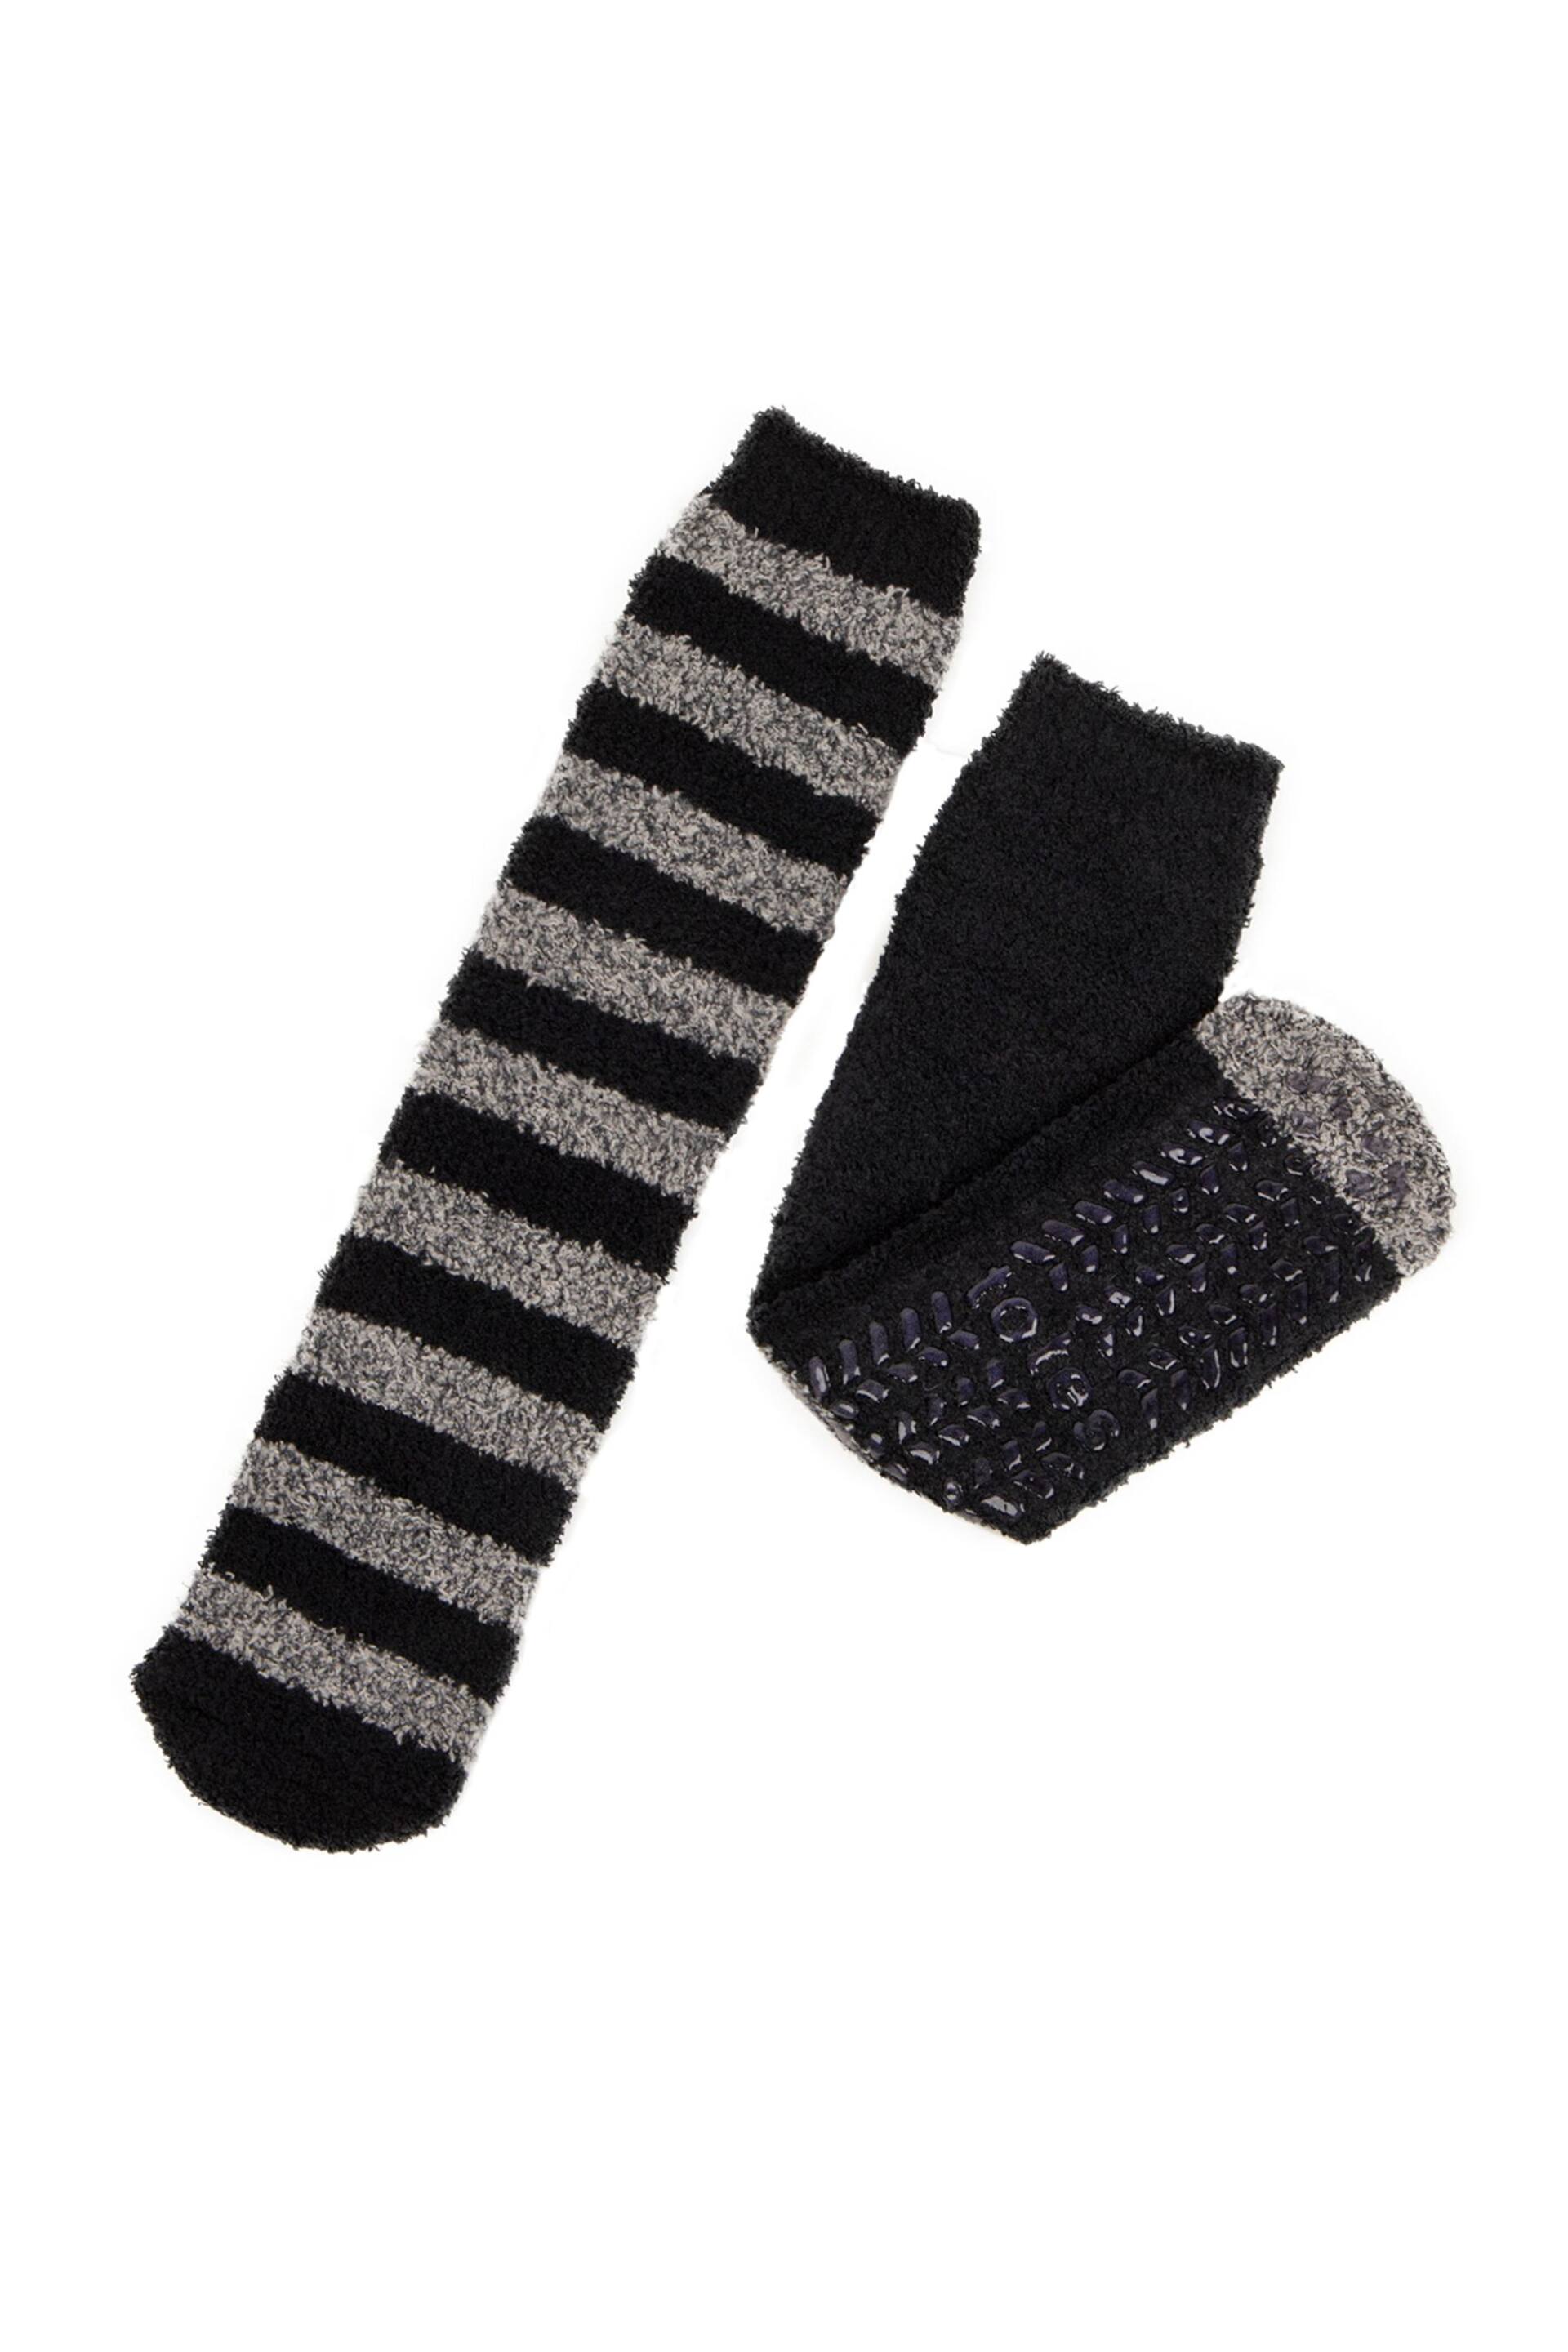 Totes Grey and Black Mens Supersoft Socks Twin Pack - Image 1 of 4